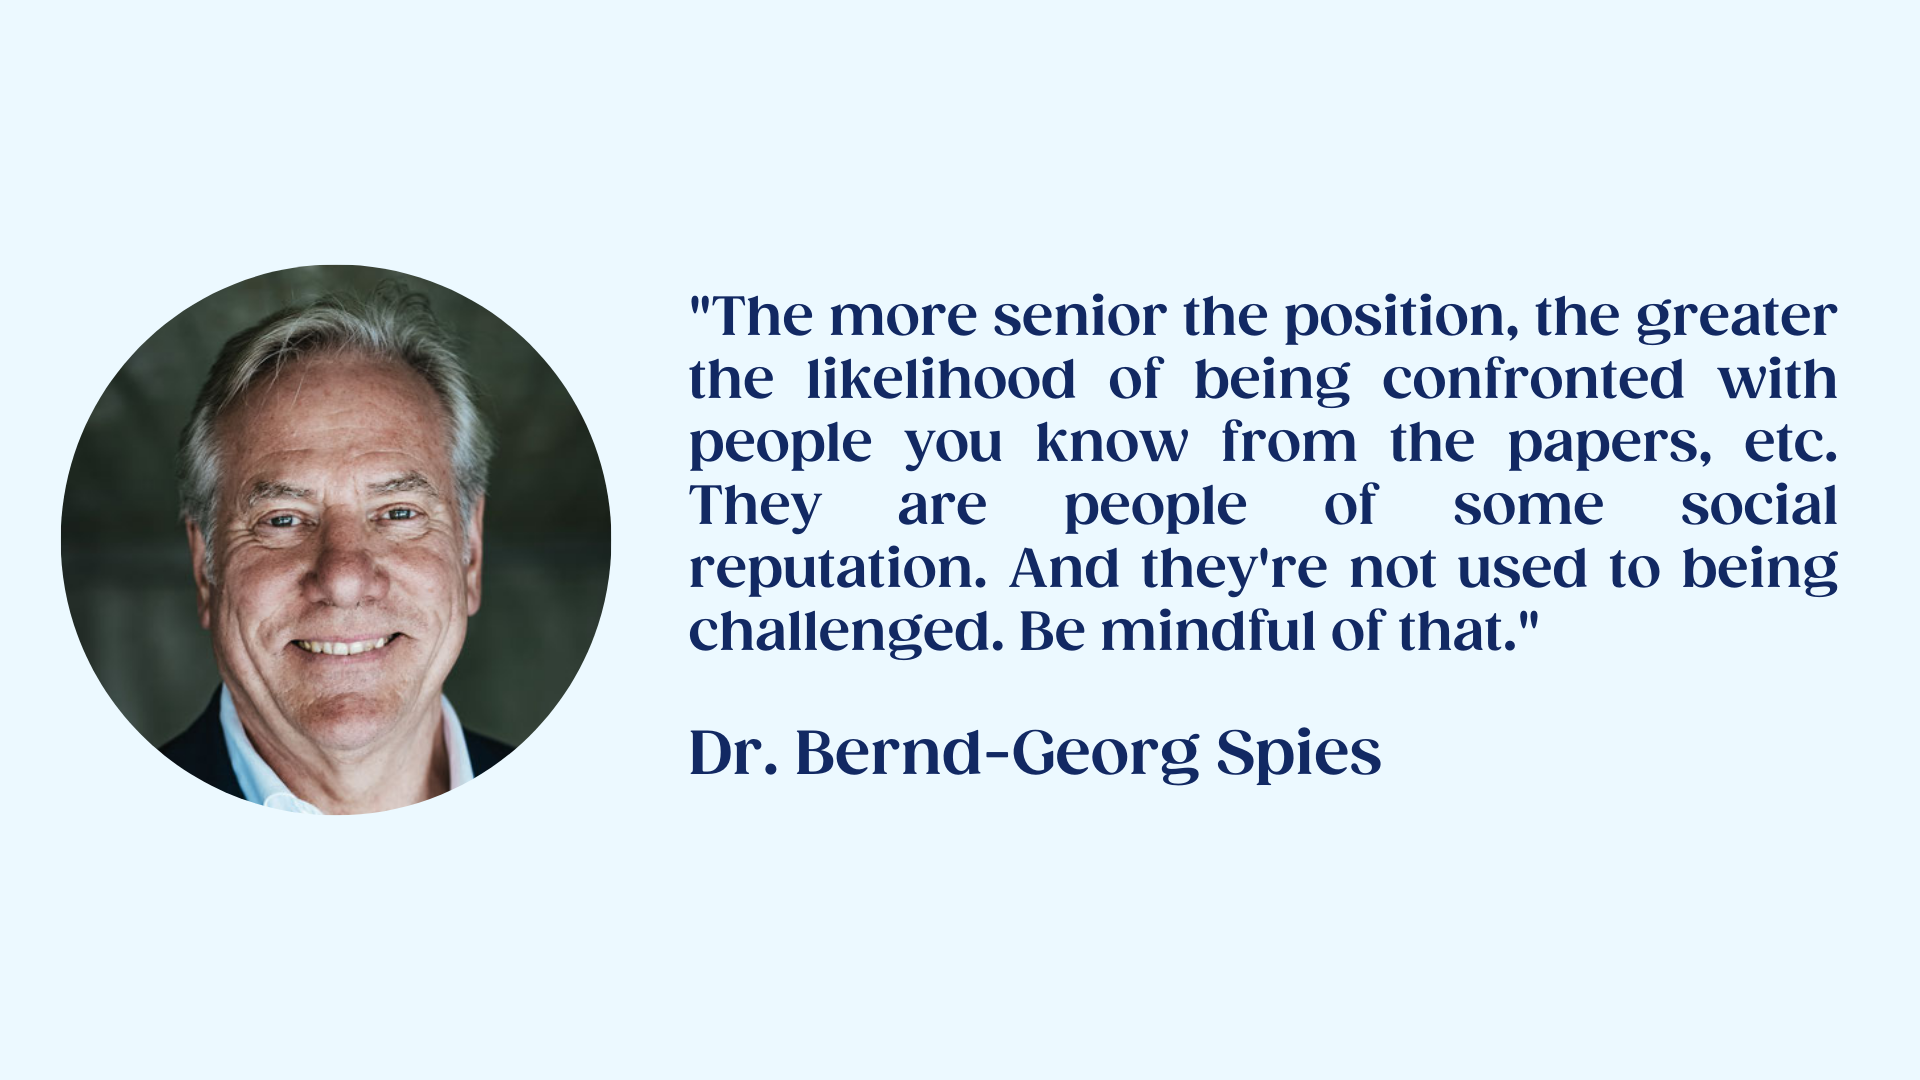 Bernd-Georg Spies on interviewing senior executives - Wisnio.png